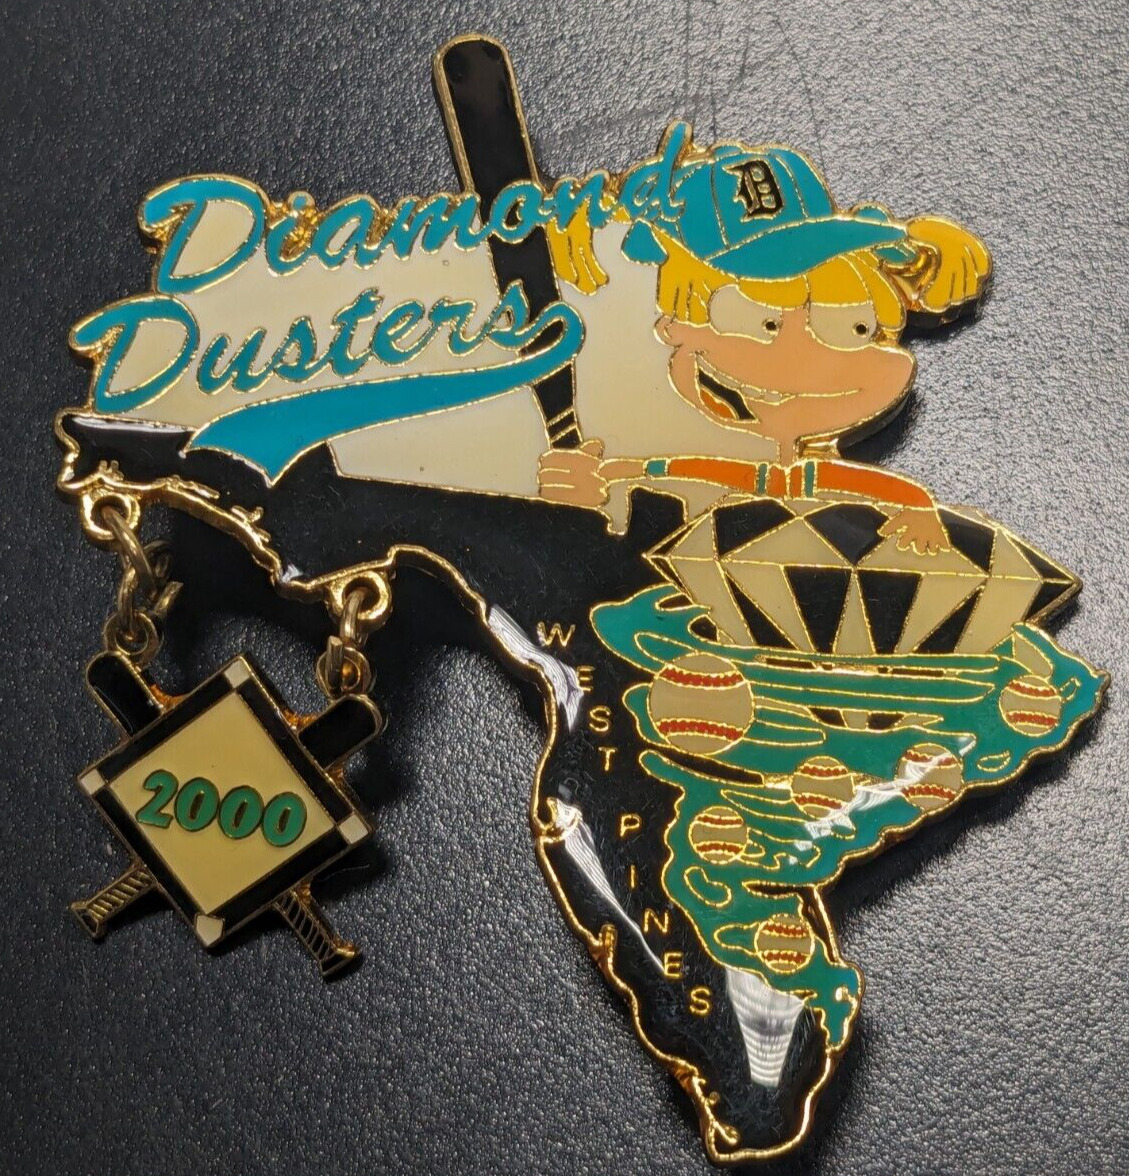 NEW 2000 West Pines FL - Diamond Dusters Softball -Rugrats- Enamel Backpack Pin